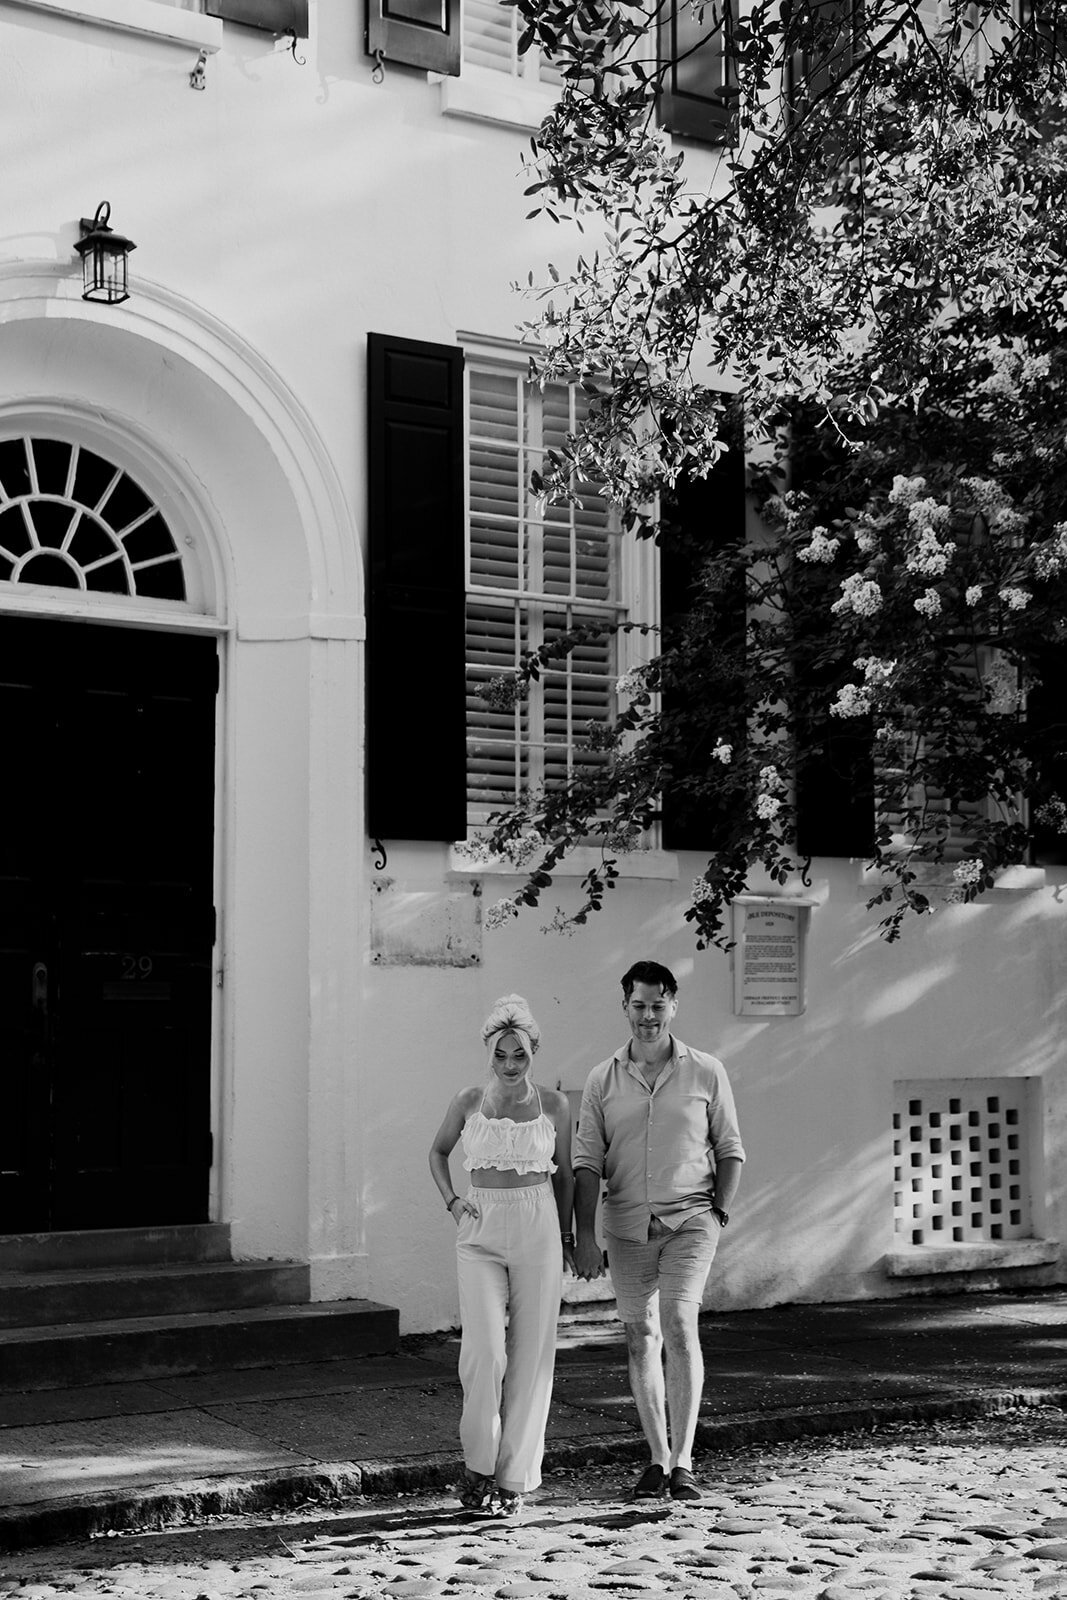 Couple walking on cobblestone in front of white house with black door